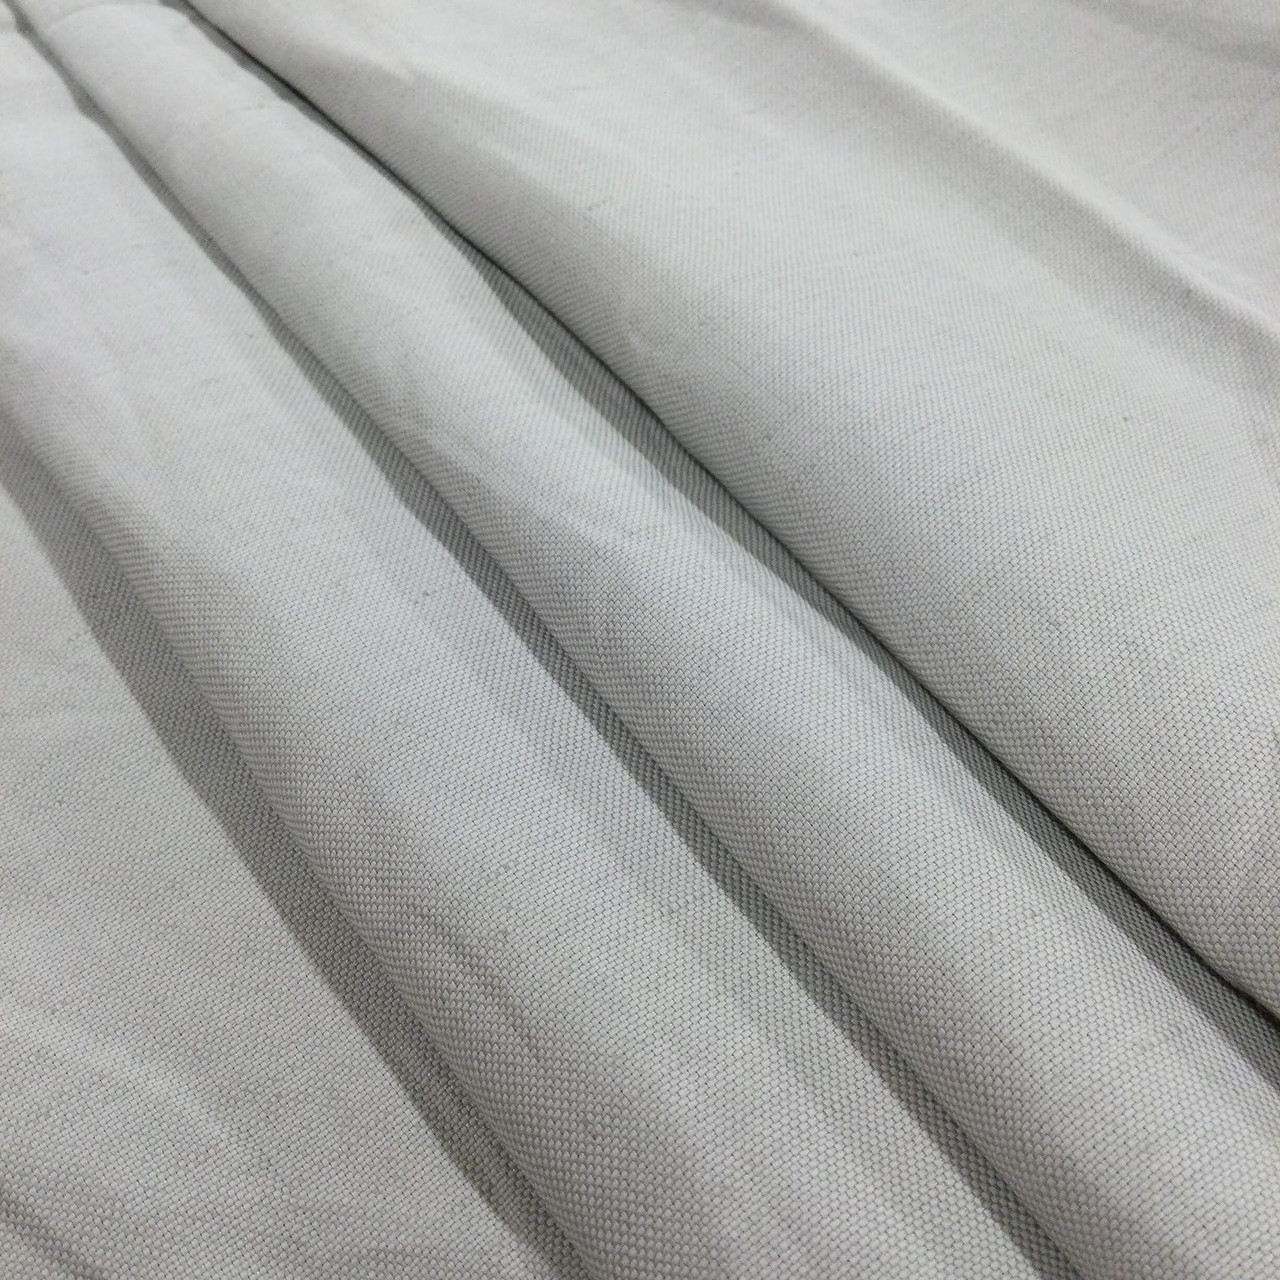 Cotton Polyester Broadcloth Fabric 60 inch Apparel Solid PolyCotton Per  Yard